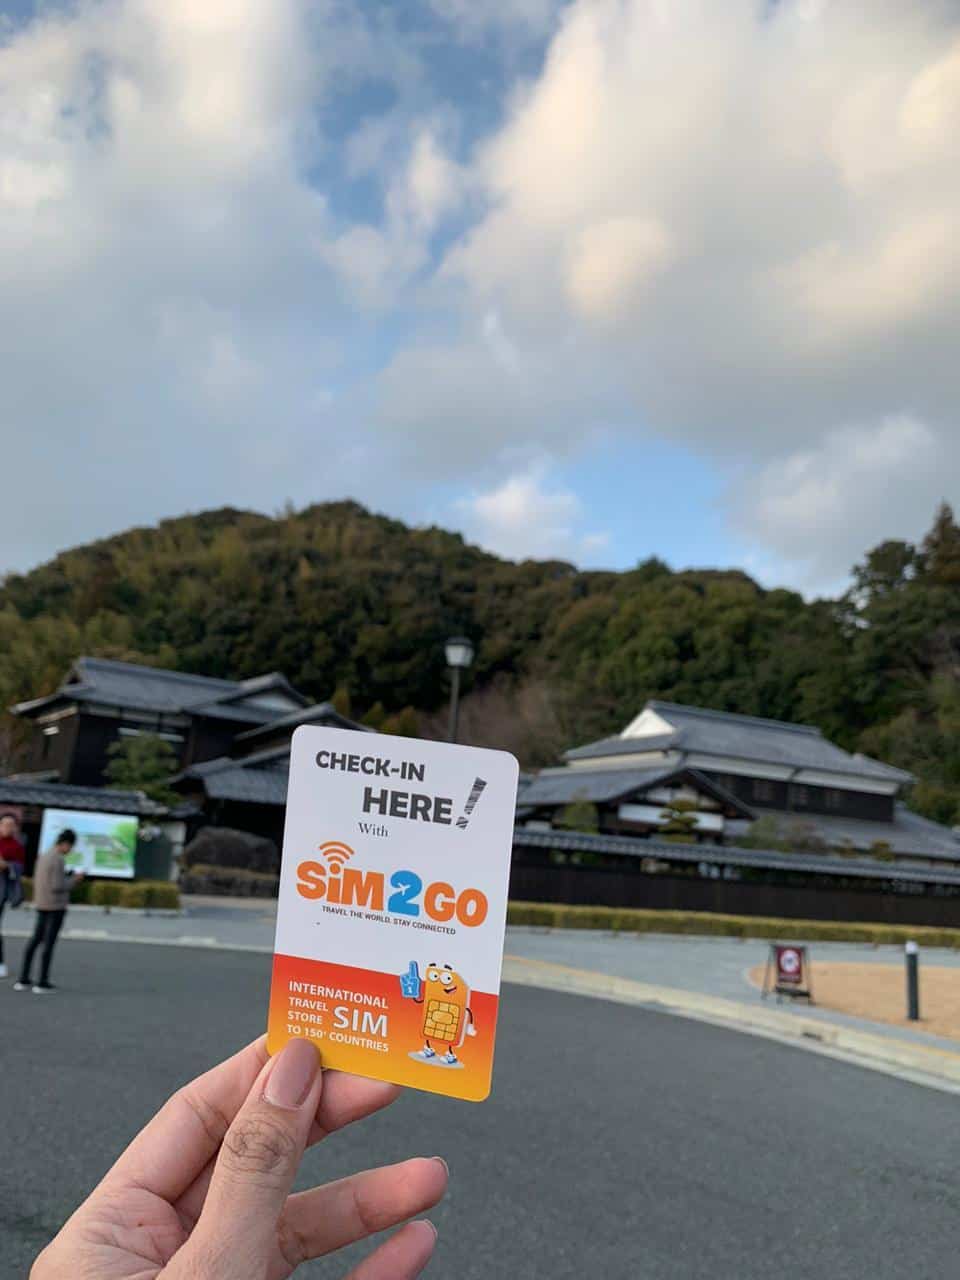 Japan: Experience buying cheap Japanese 4G Sim when traveling